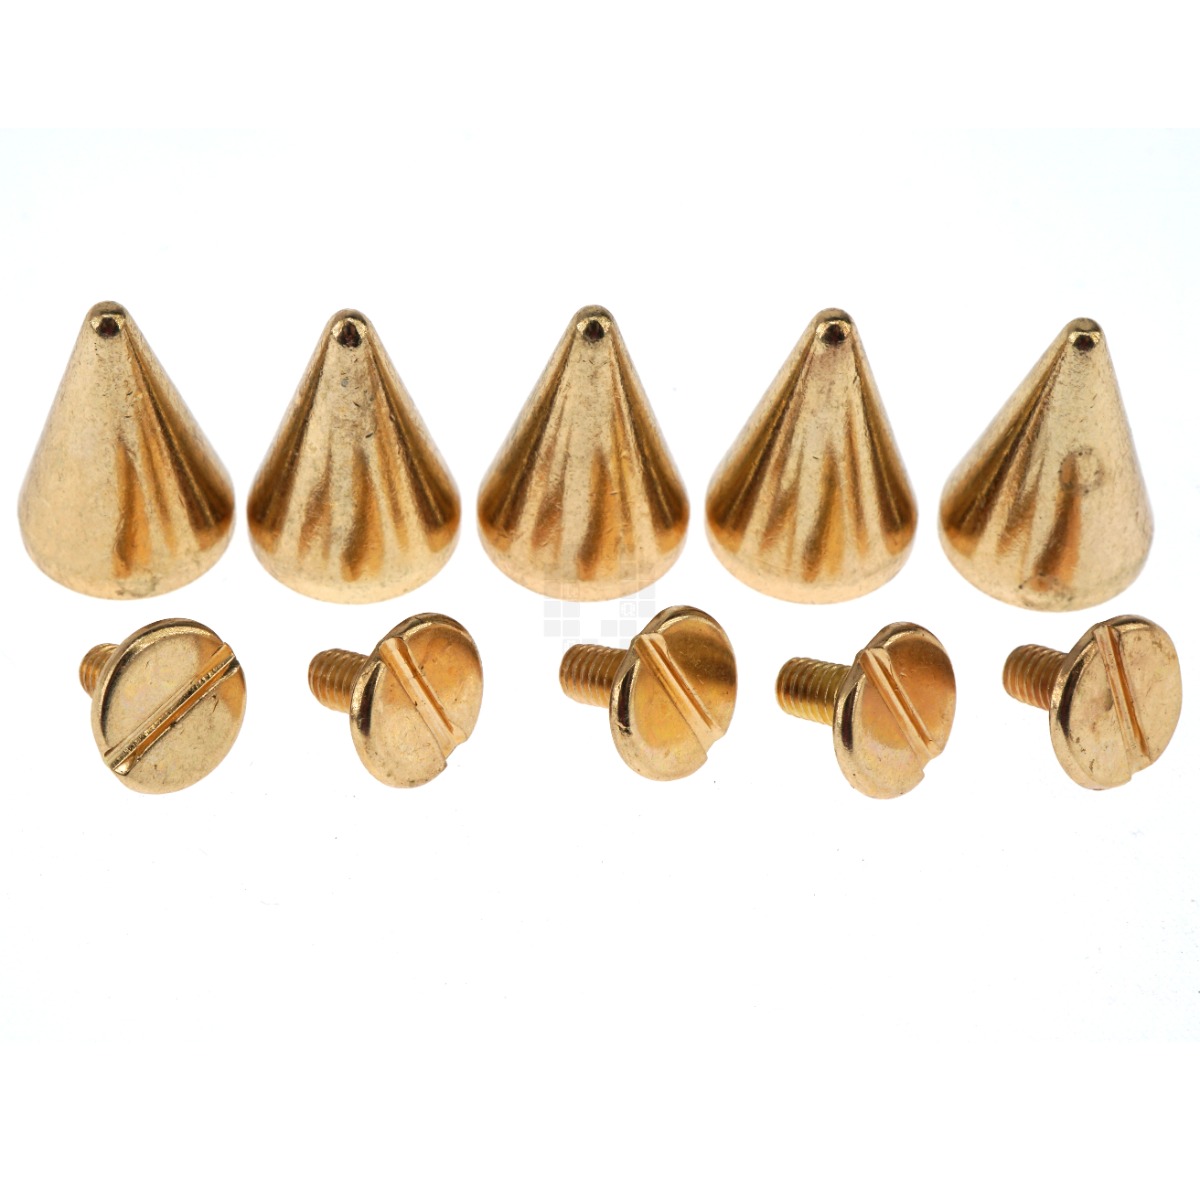 Gold Conical Spike 10x15mm, M3-0.5mm Threaded, 5 Pack